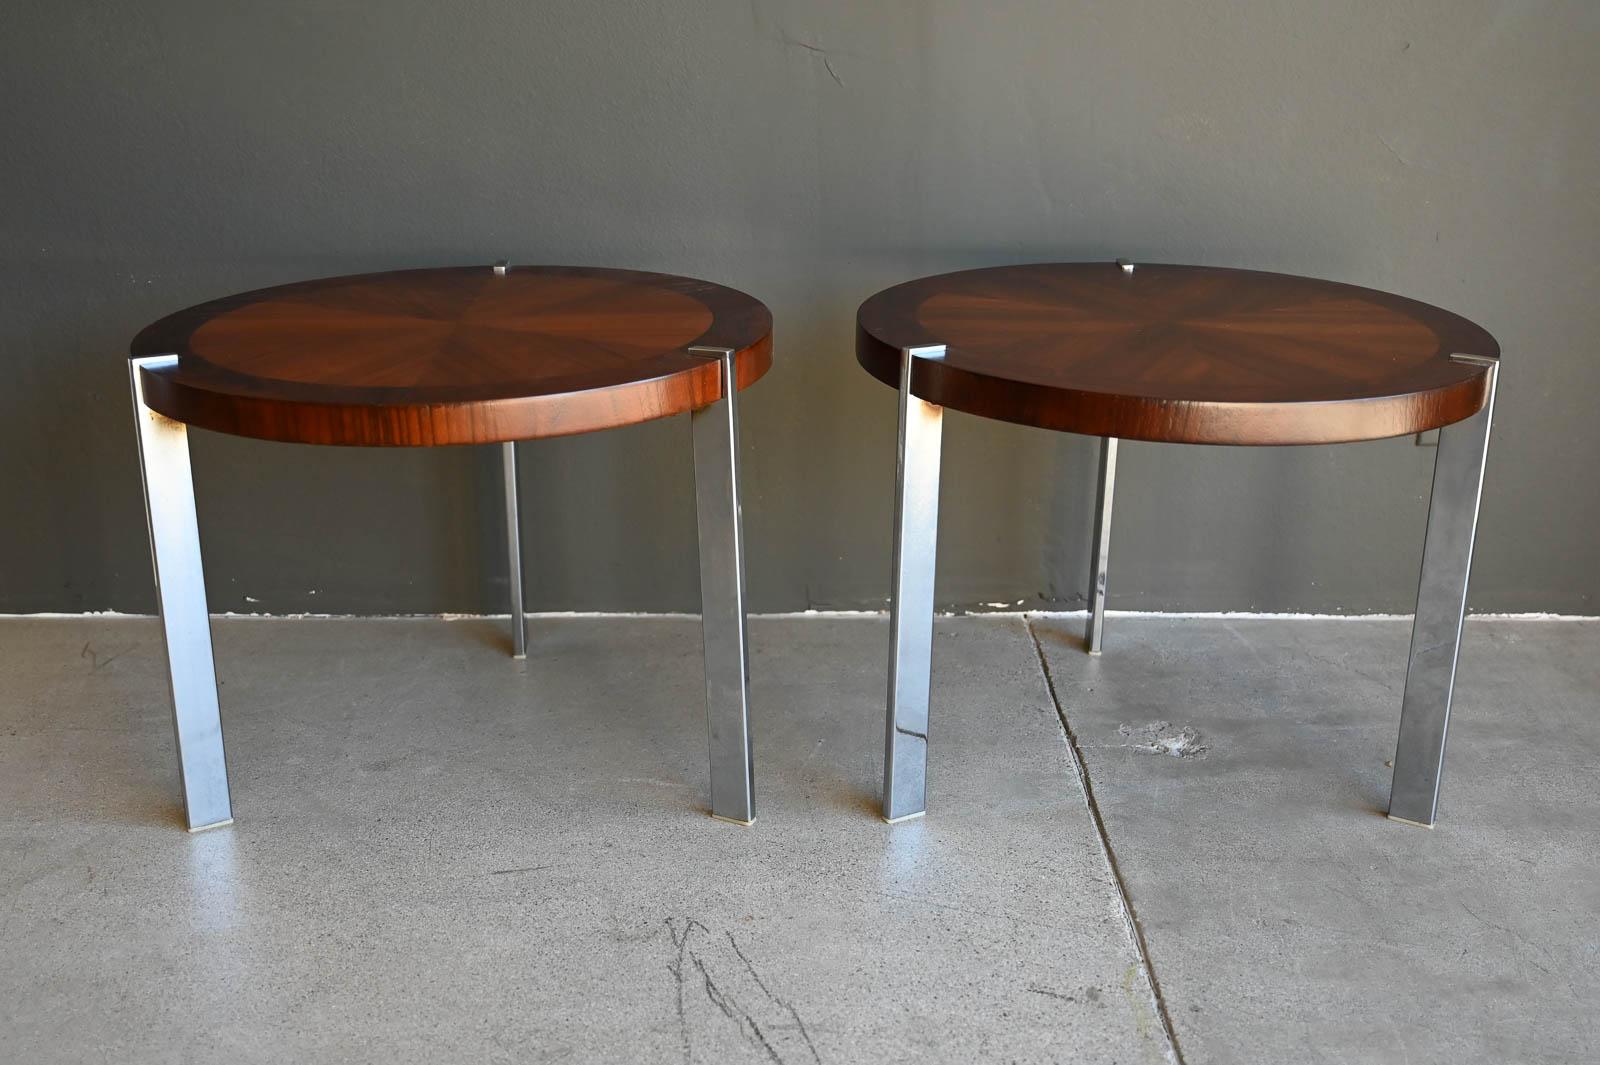 Pair of Rosewood, Walnut and Chrome Side Tables from Lane, ca. 1965.  Professionally restored wood tops with rosewood and walnut detail and polished chrome legs.  Great quality and pair from Lane Furniture, Alta Vista, VA.  Sold as a Pair.

Measure